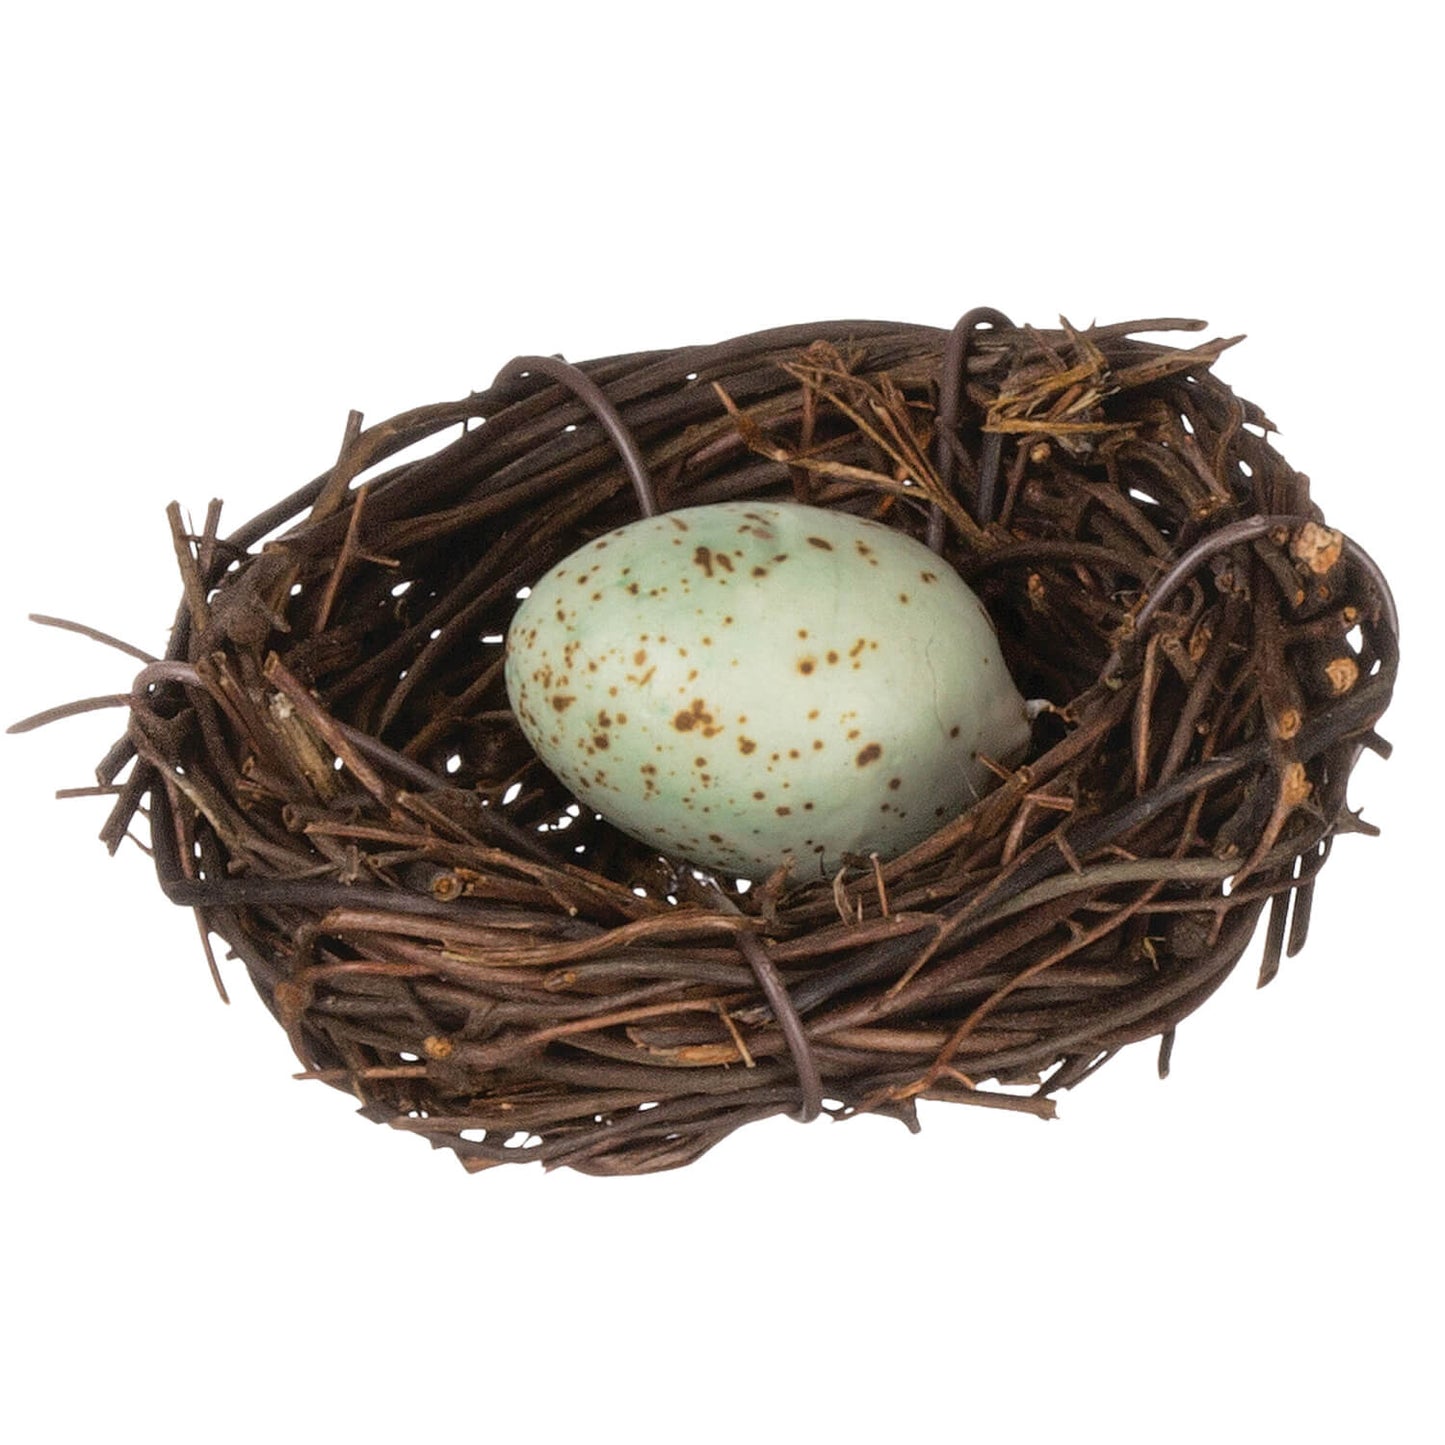 Nest with Egg